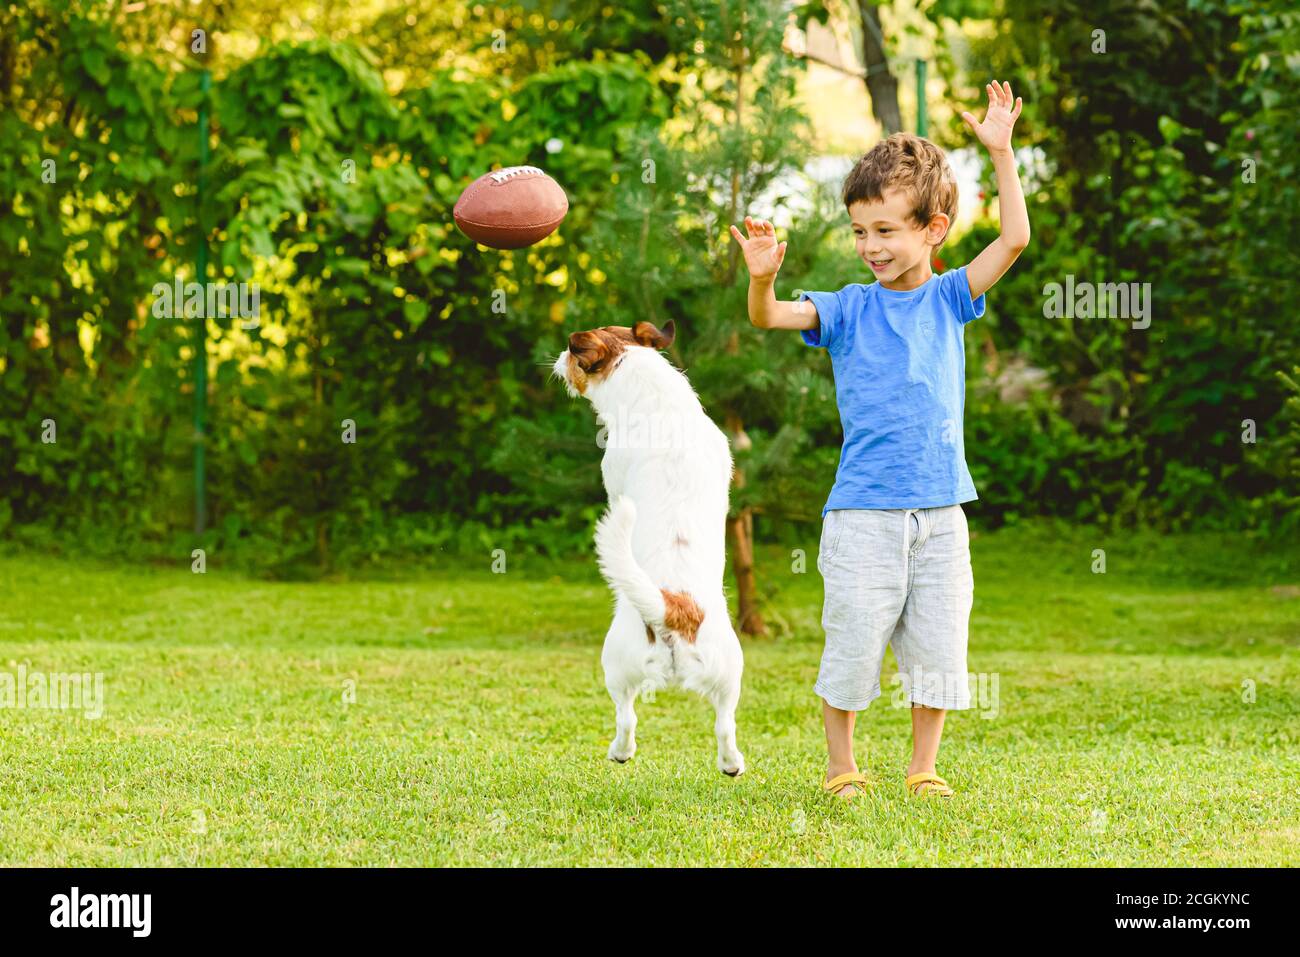 Casual rugby on backyard lawn with kid boy and his pet dog Stock Photo